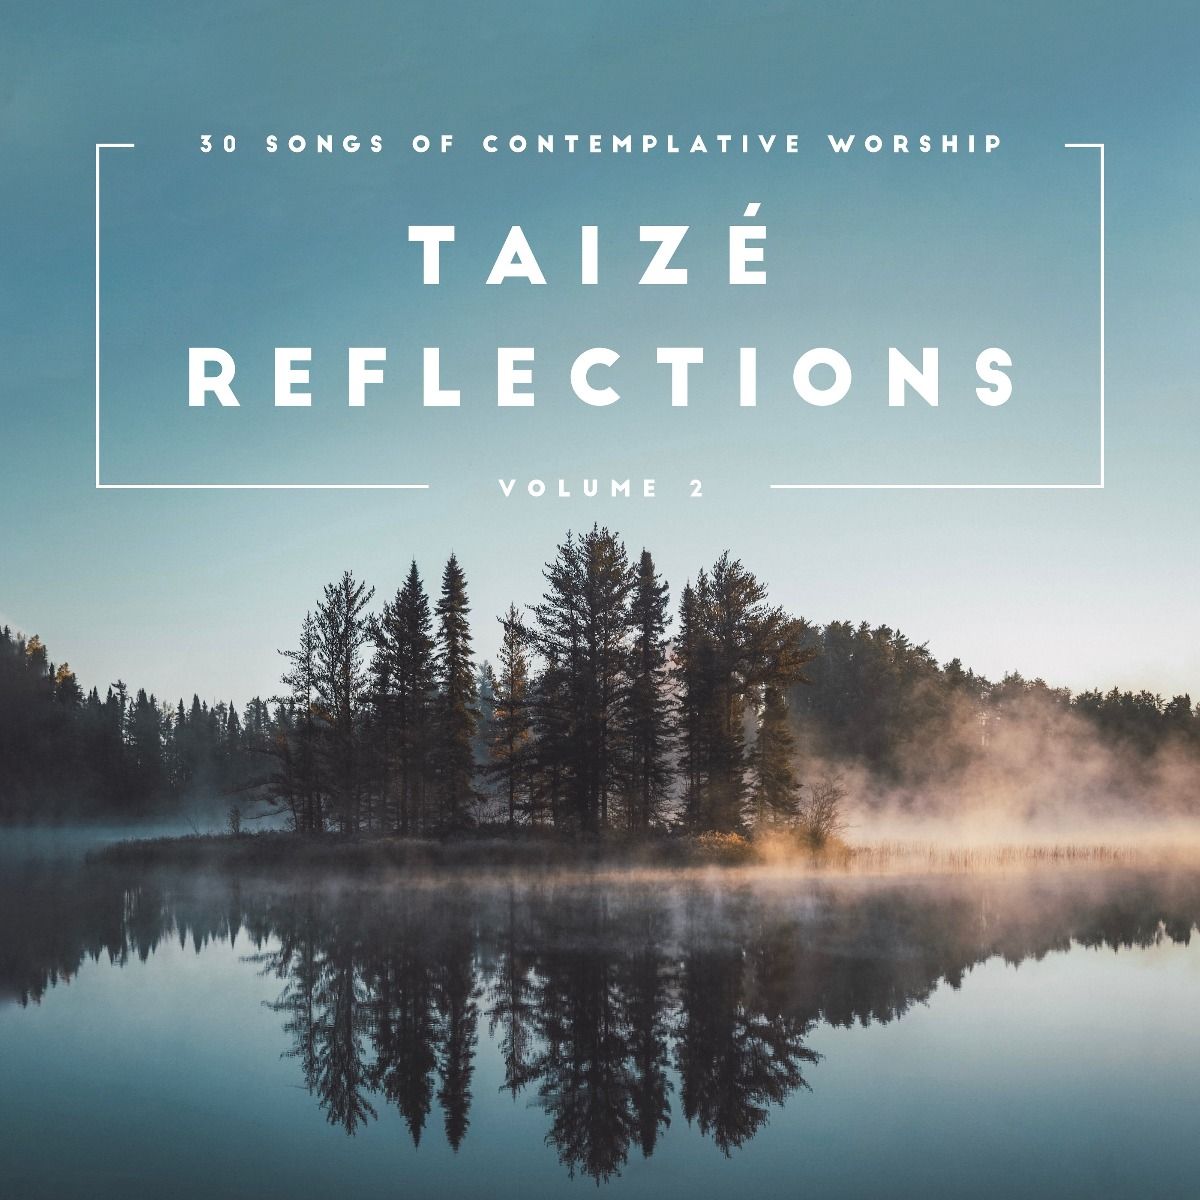 Image of Taize Reflections Volume 2 other